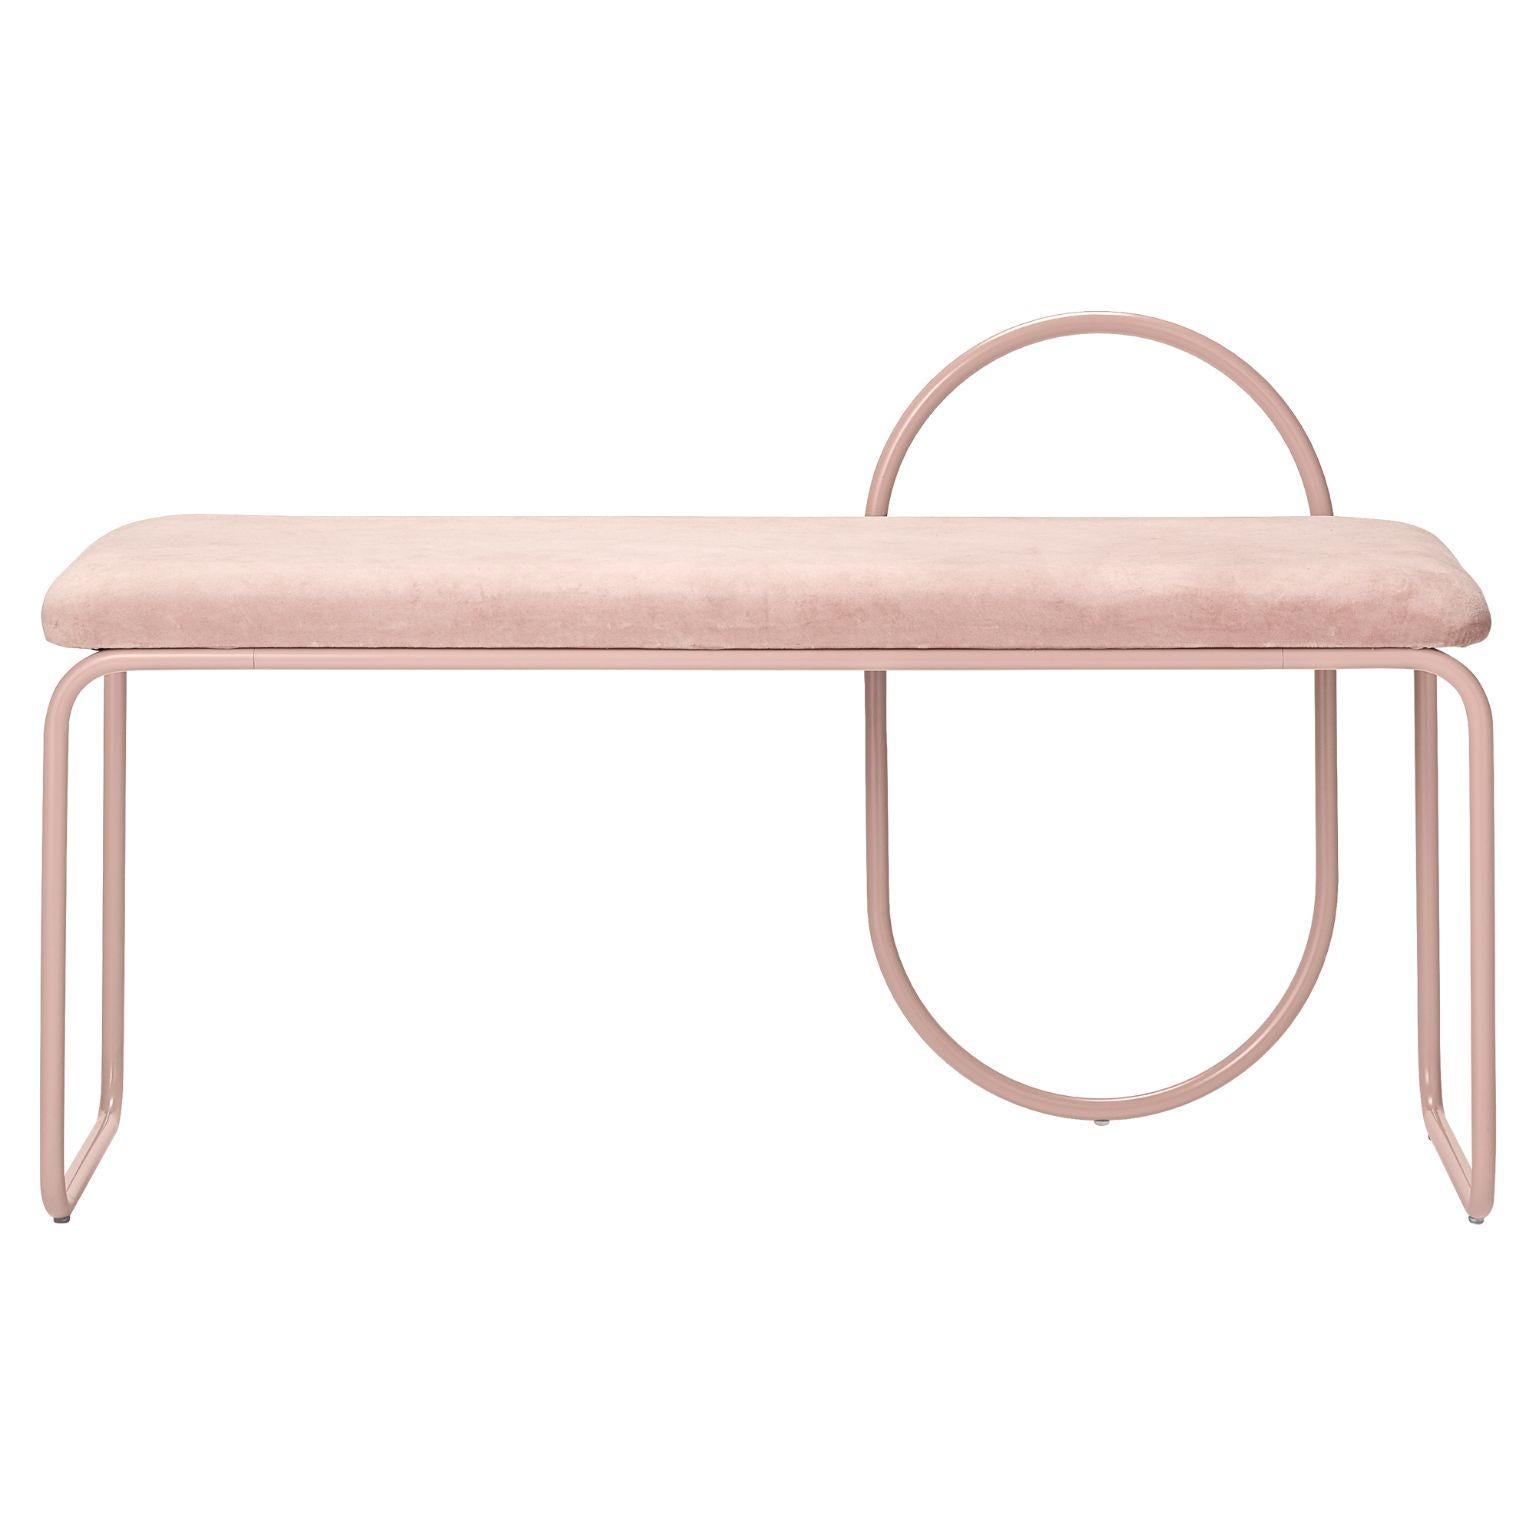 Rose velvet Minimalist bench 
Dimensions: L 110 x W 39 x H 68 CM
Materials: Cotton velvet, steel

The collection includes benches, chairs, shelves and mirrors in a wide variety of sizes.
  